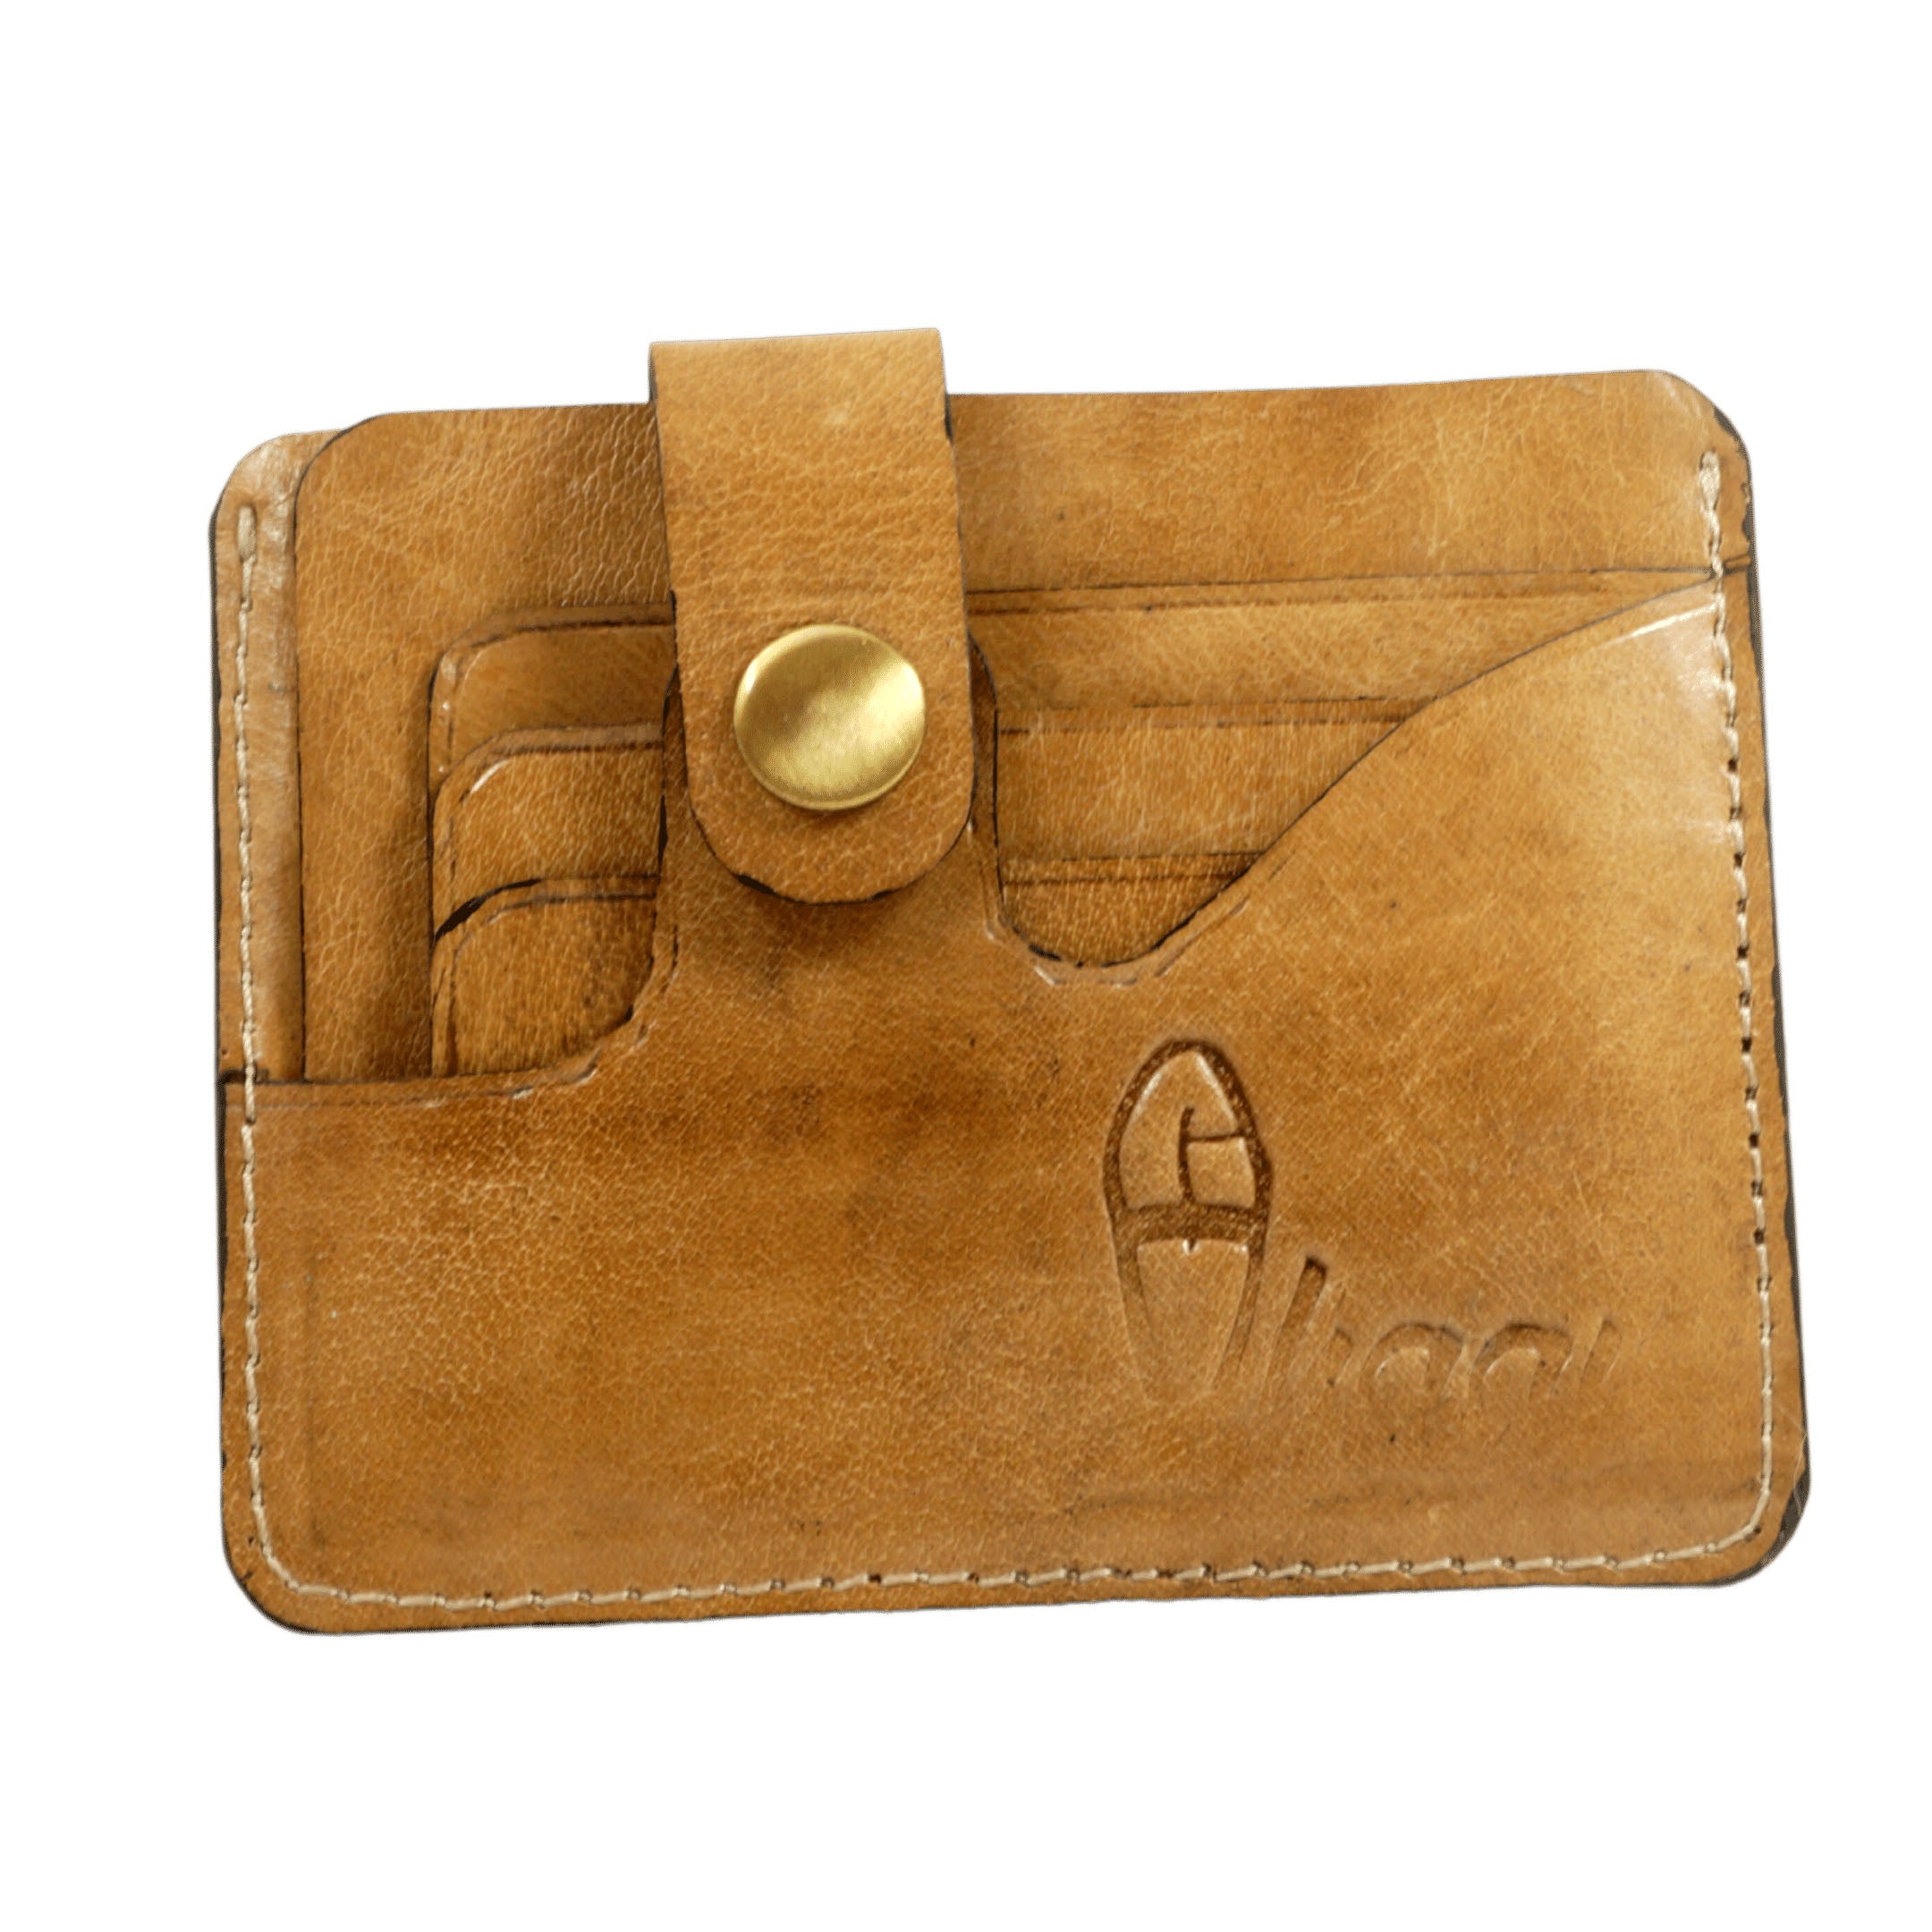 Veg Tanned Leather Artisanal Luxe  Special Card Holder  - Handcrafted Luxury with RFID Protection